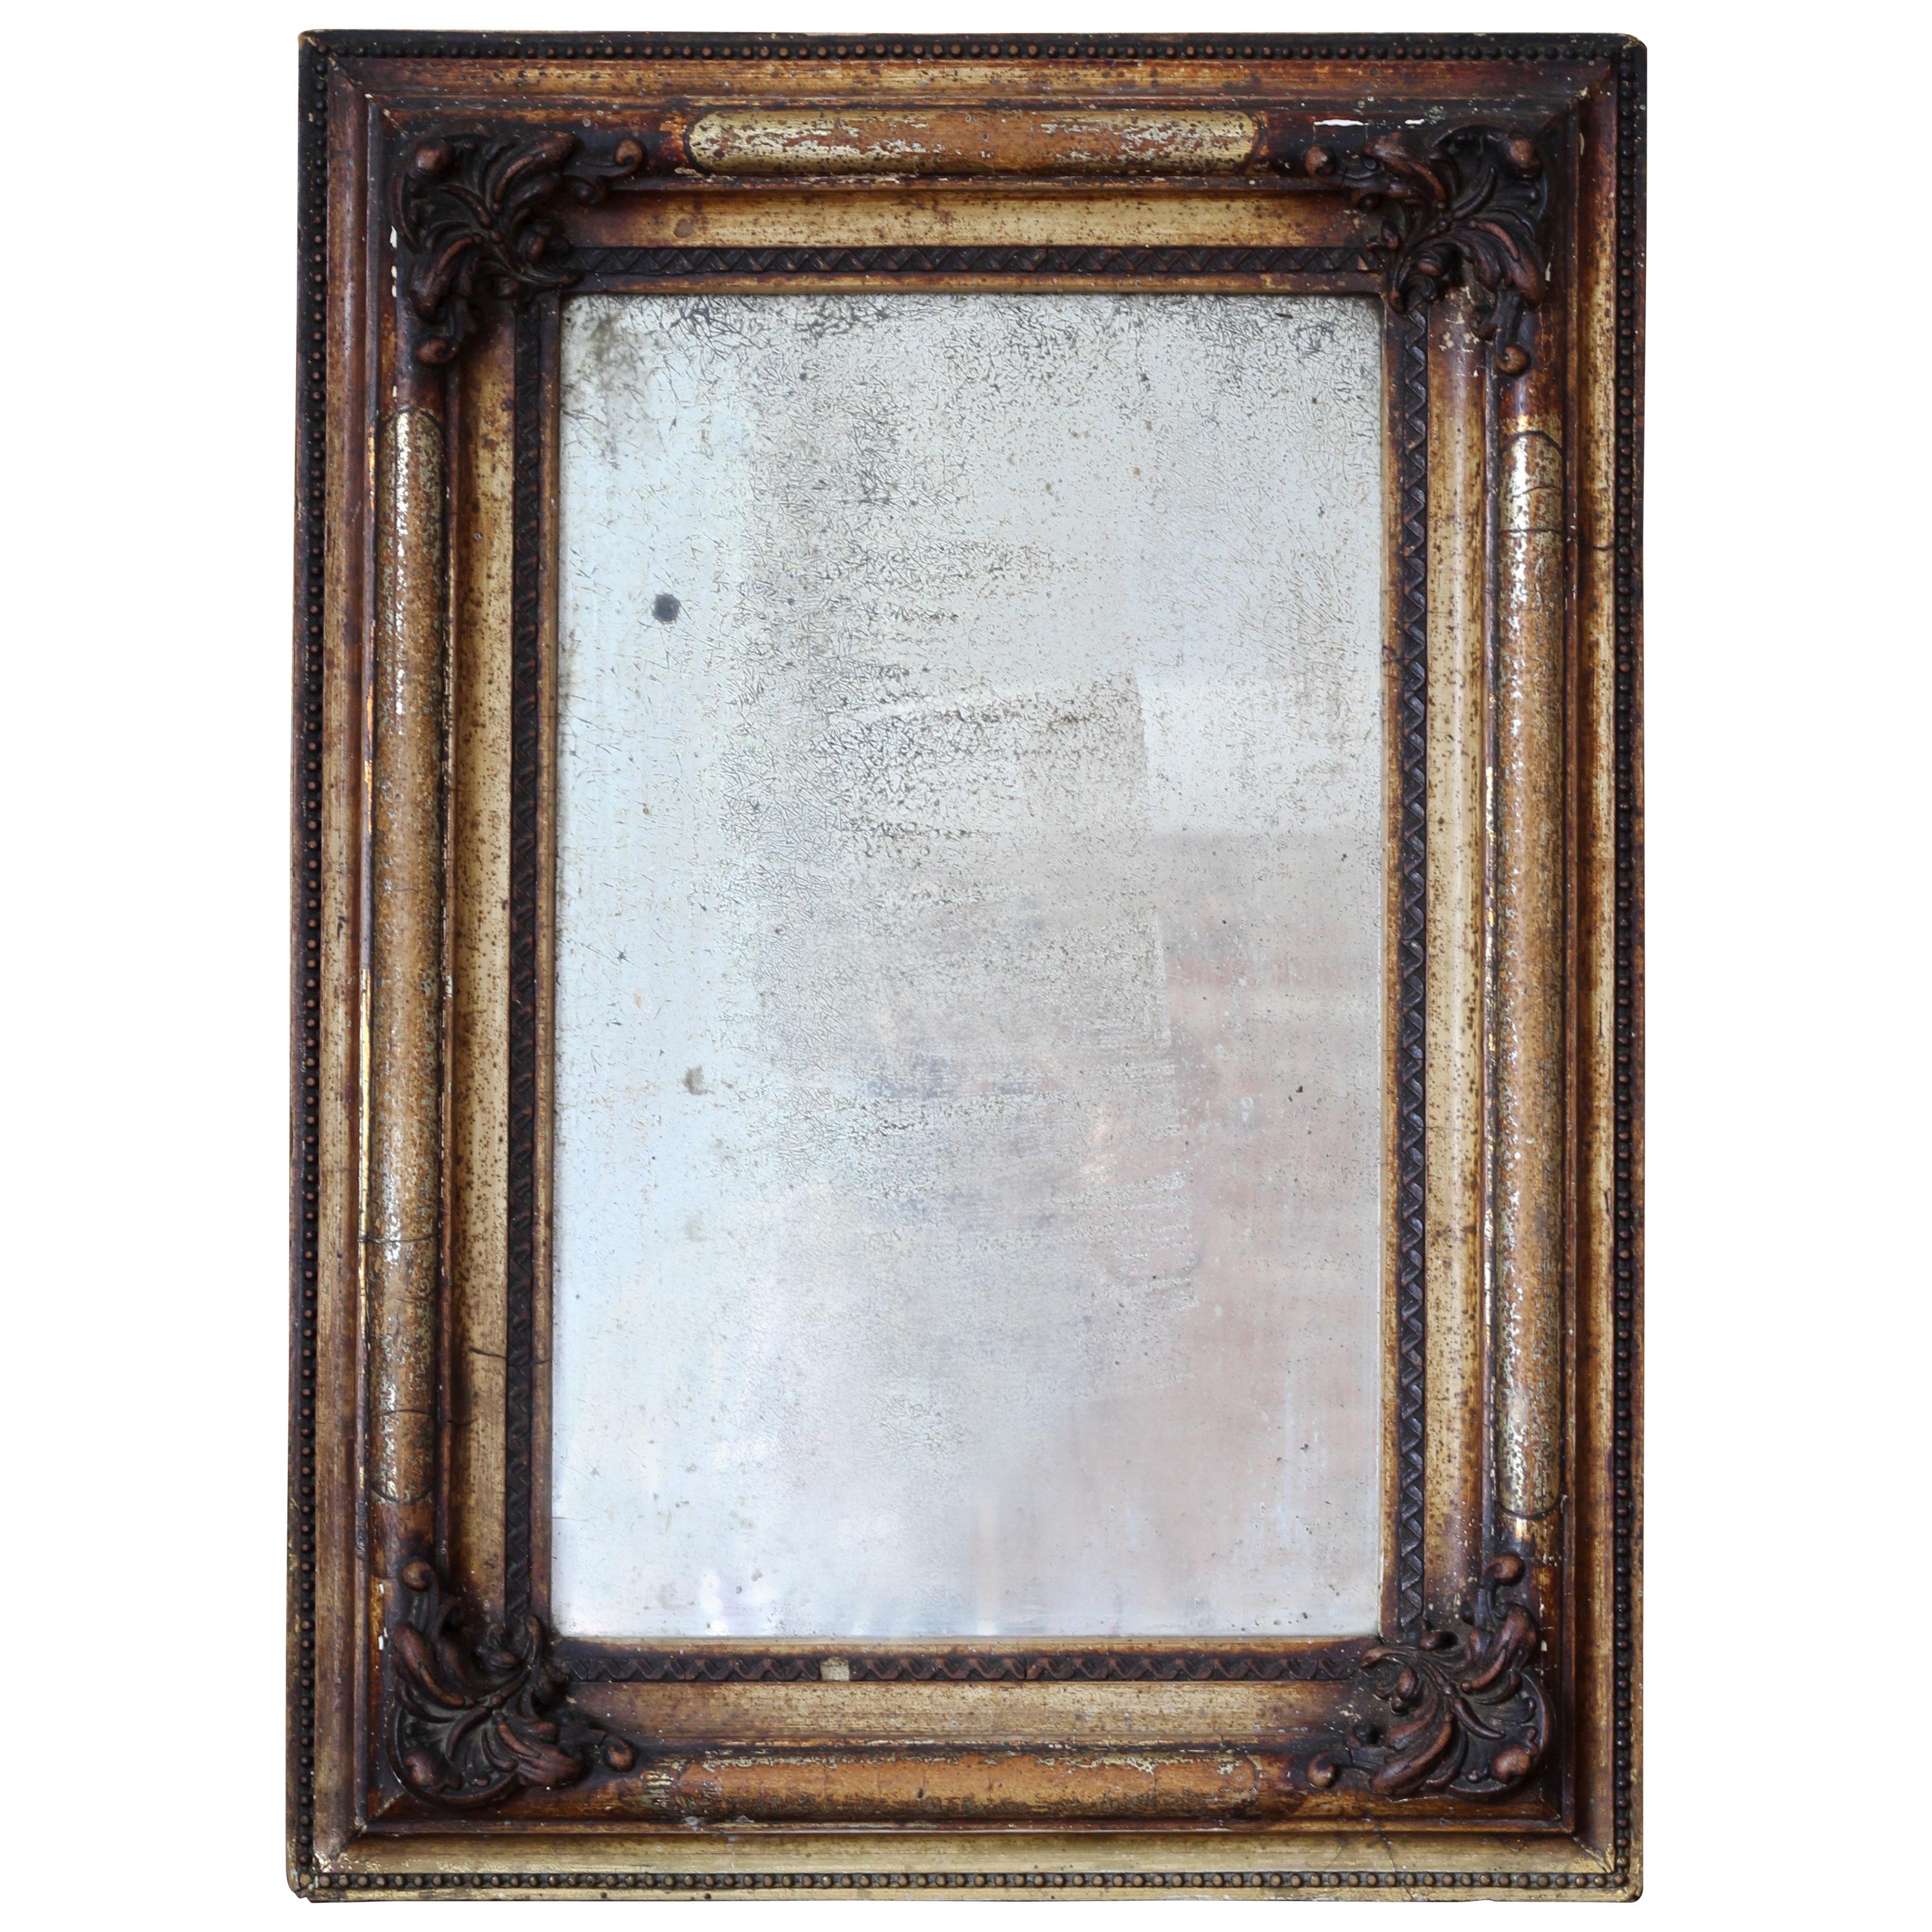 Antique Wall Mirror in Wooden Decorative Frame, circa 19th Century For Sale